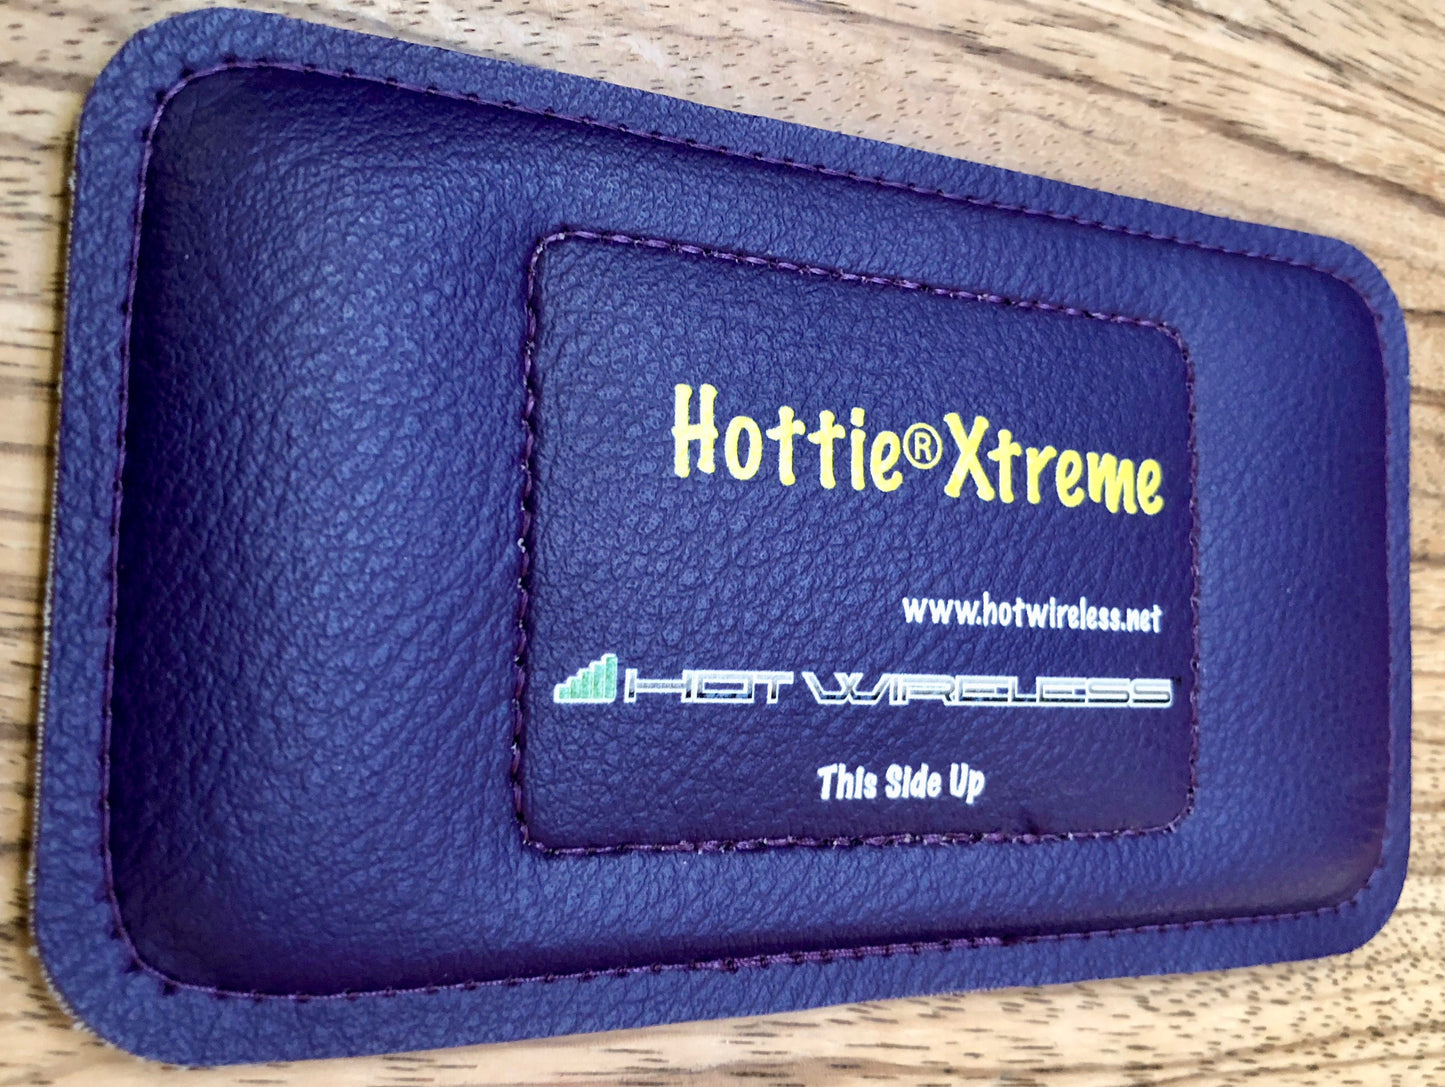 Hottie®Xtreme Cell, WiFi Booster $29.99